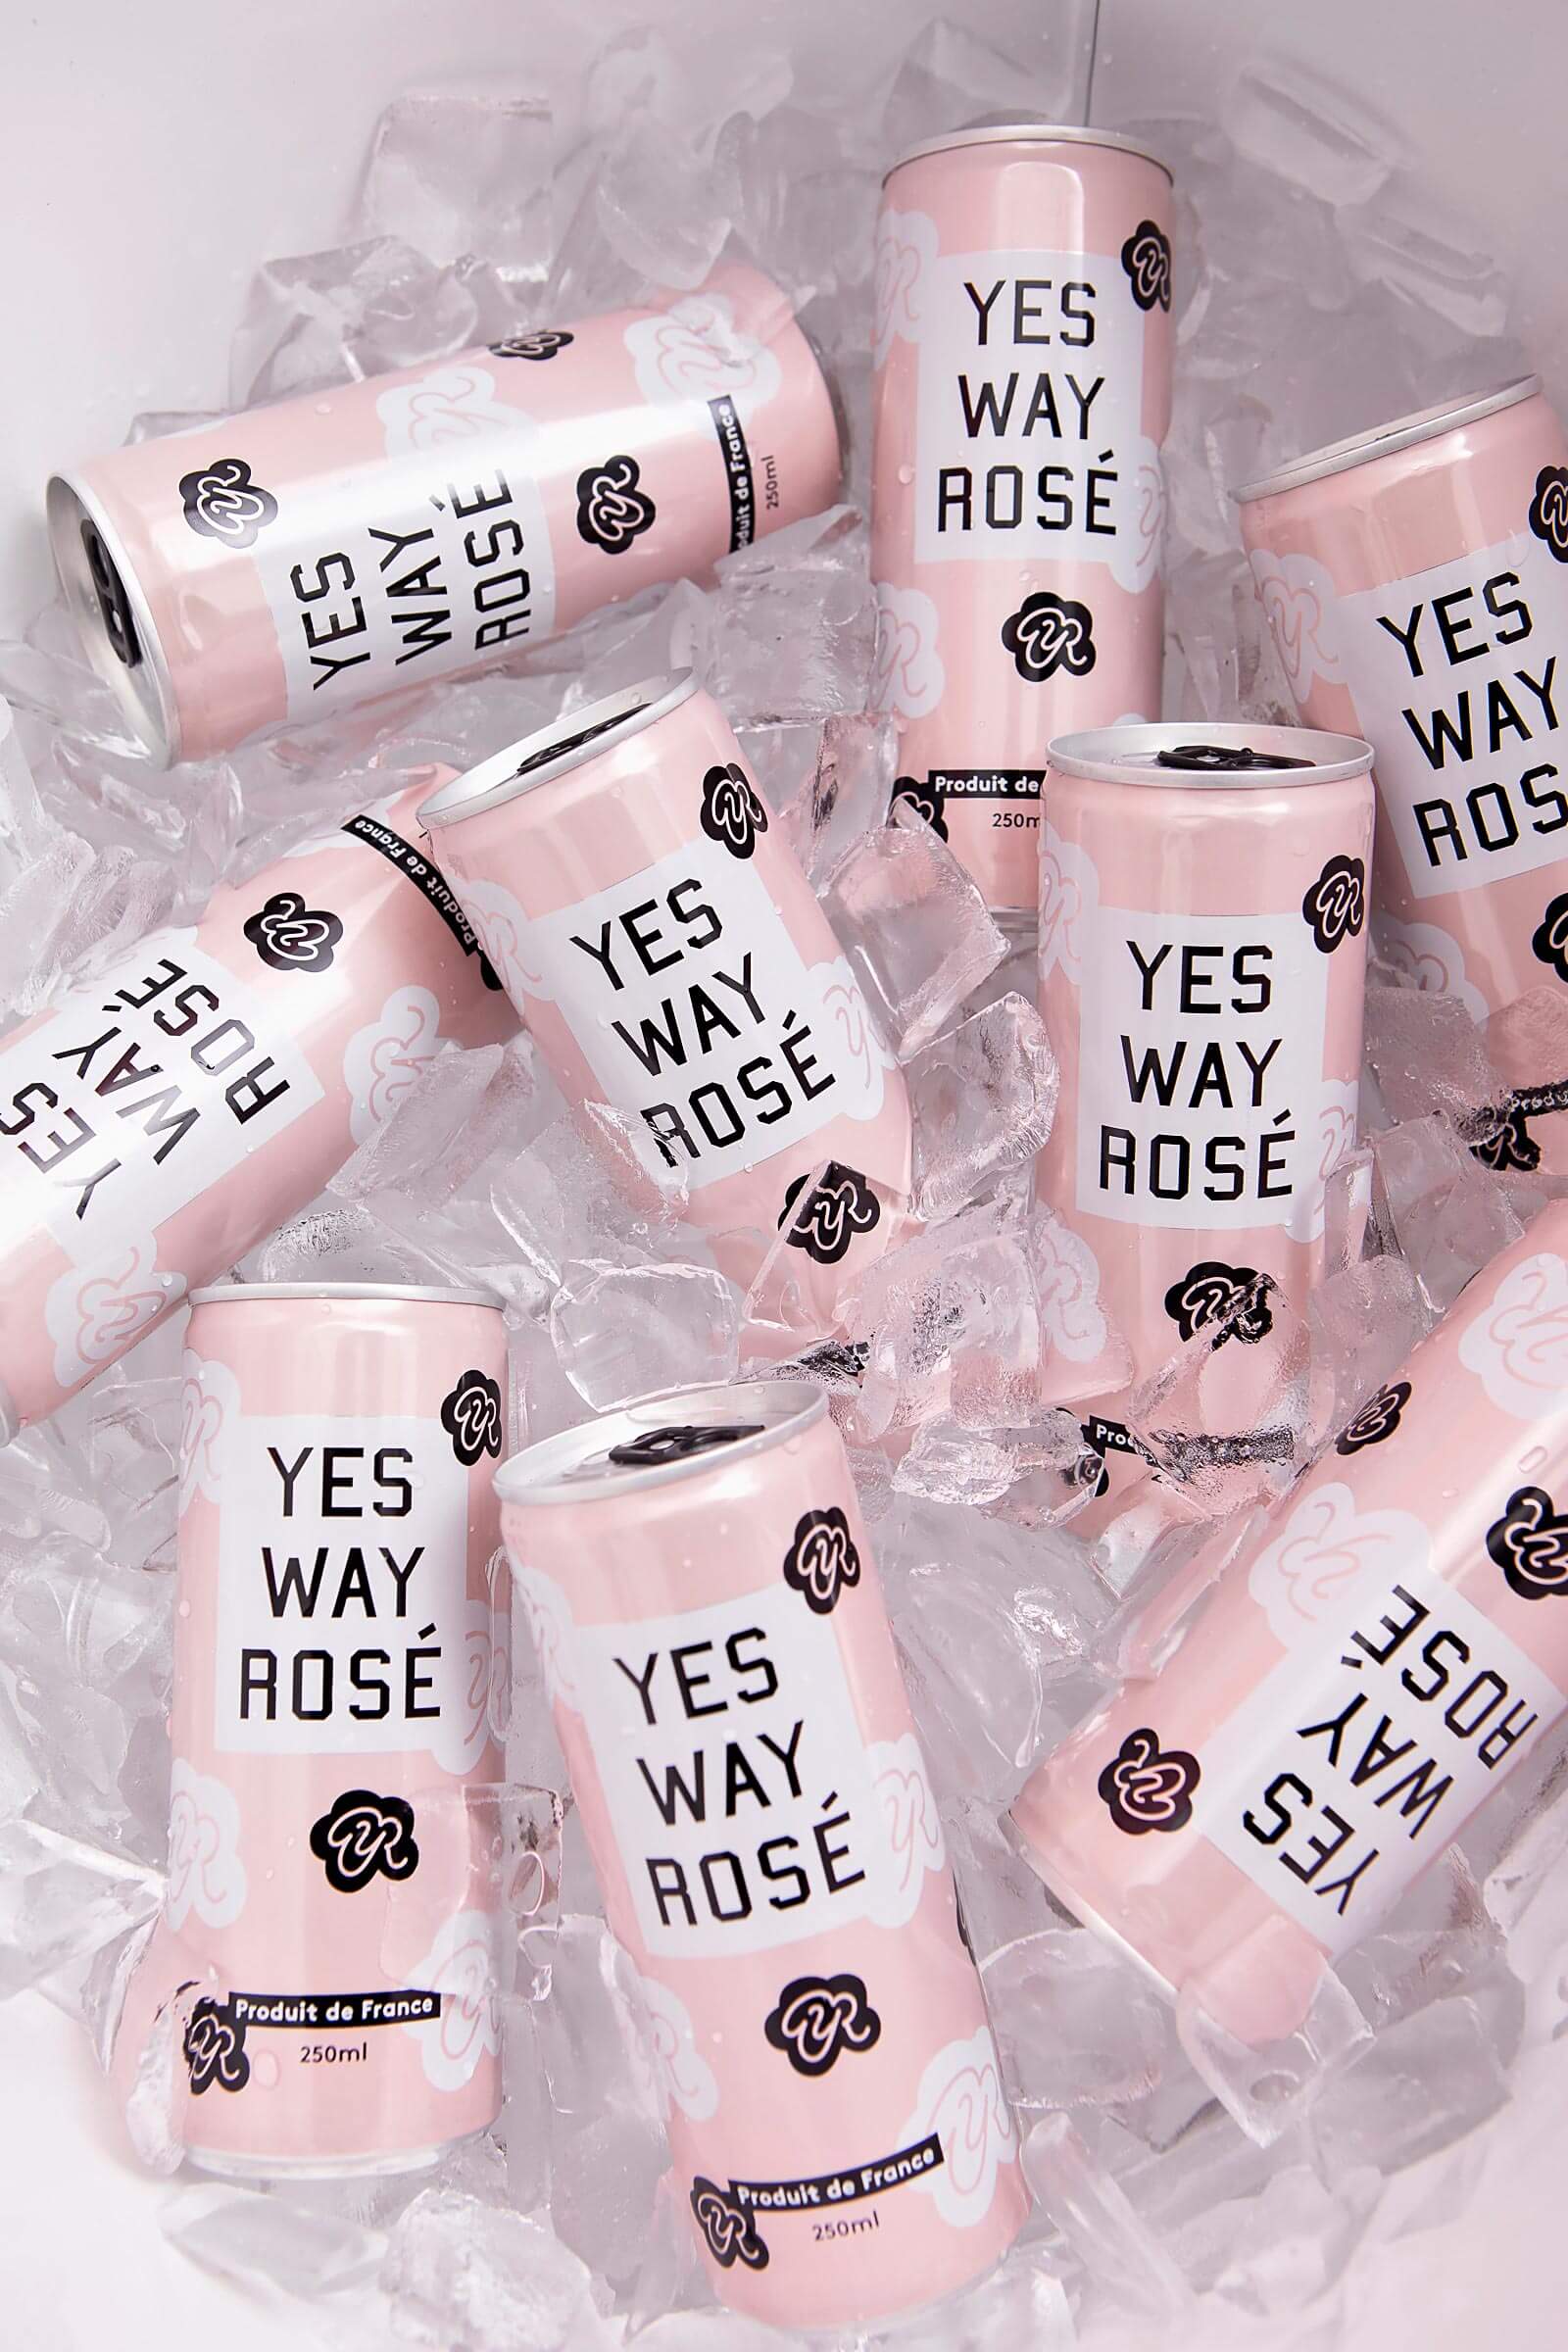 yes way rose cans cooler